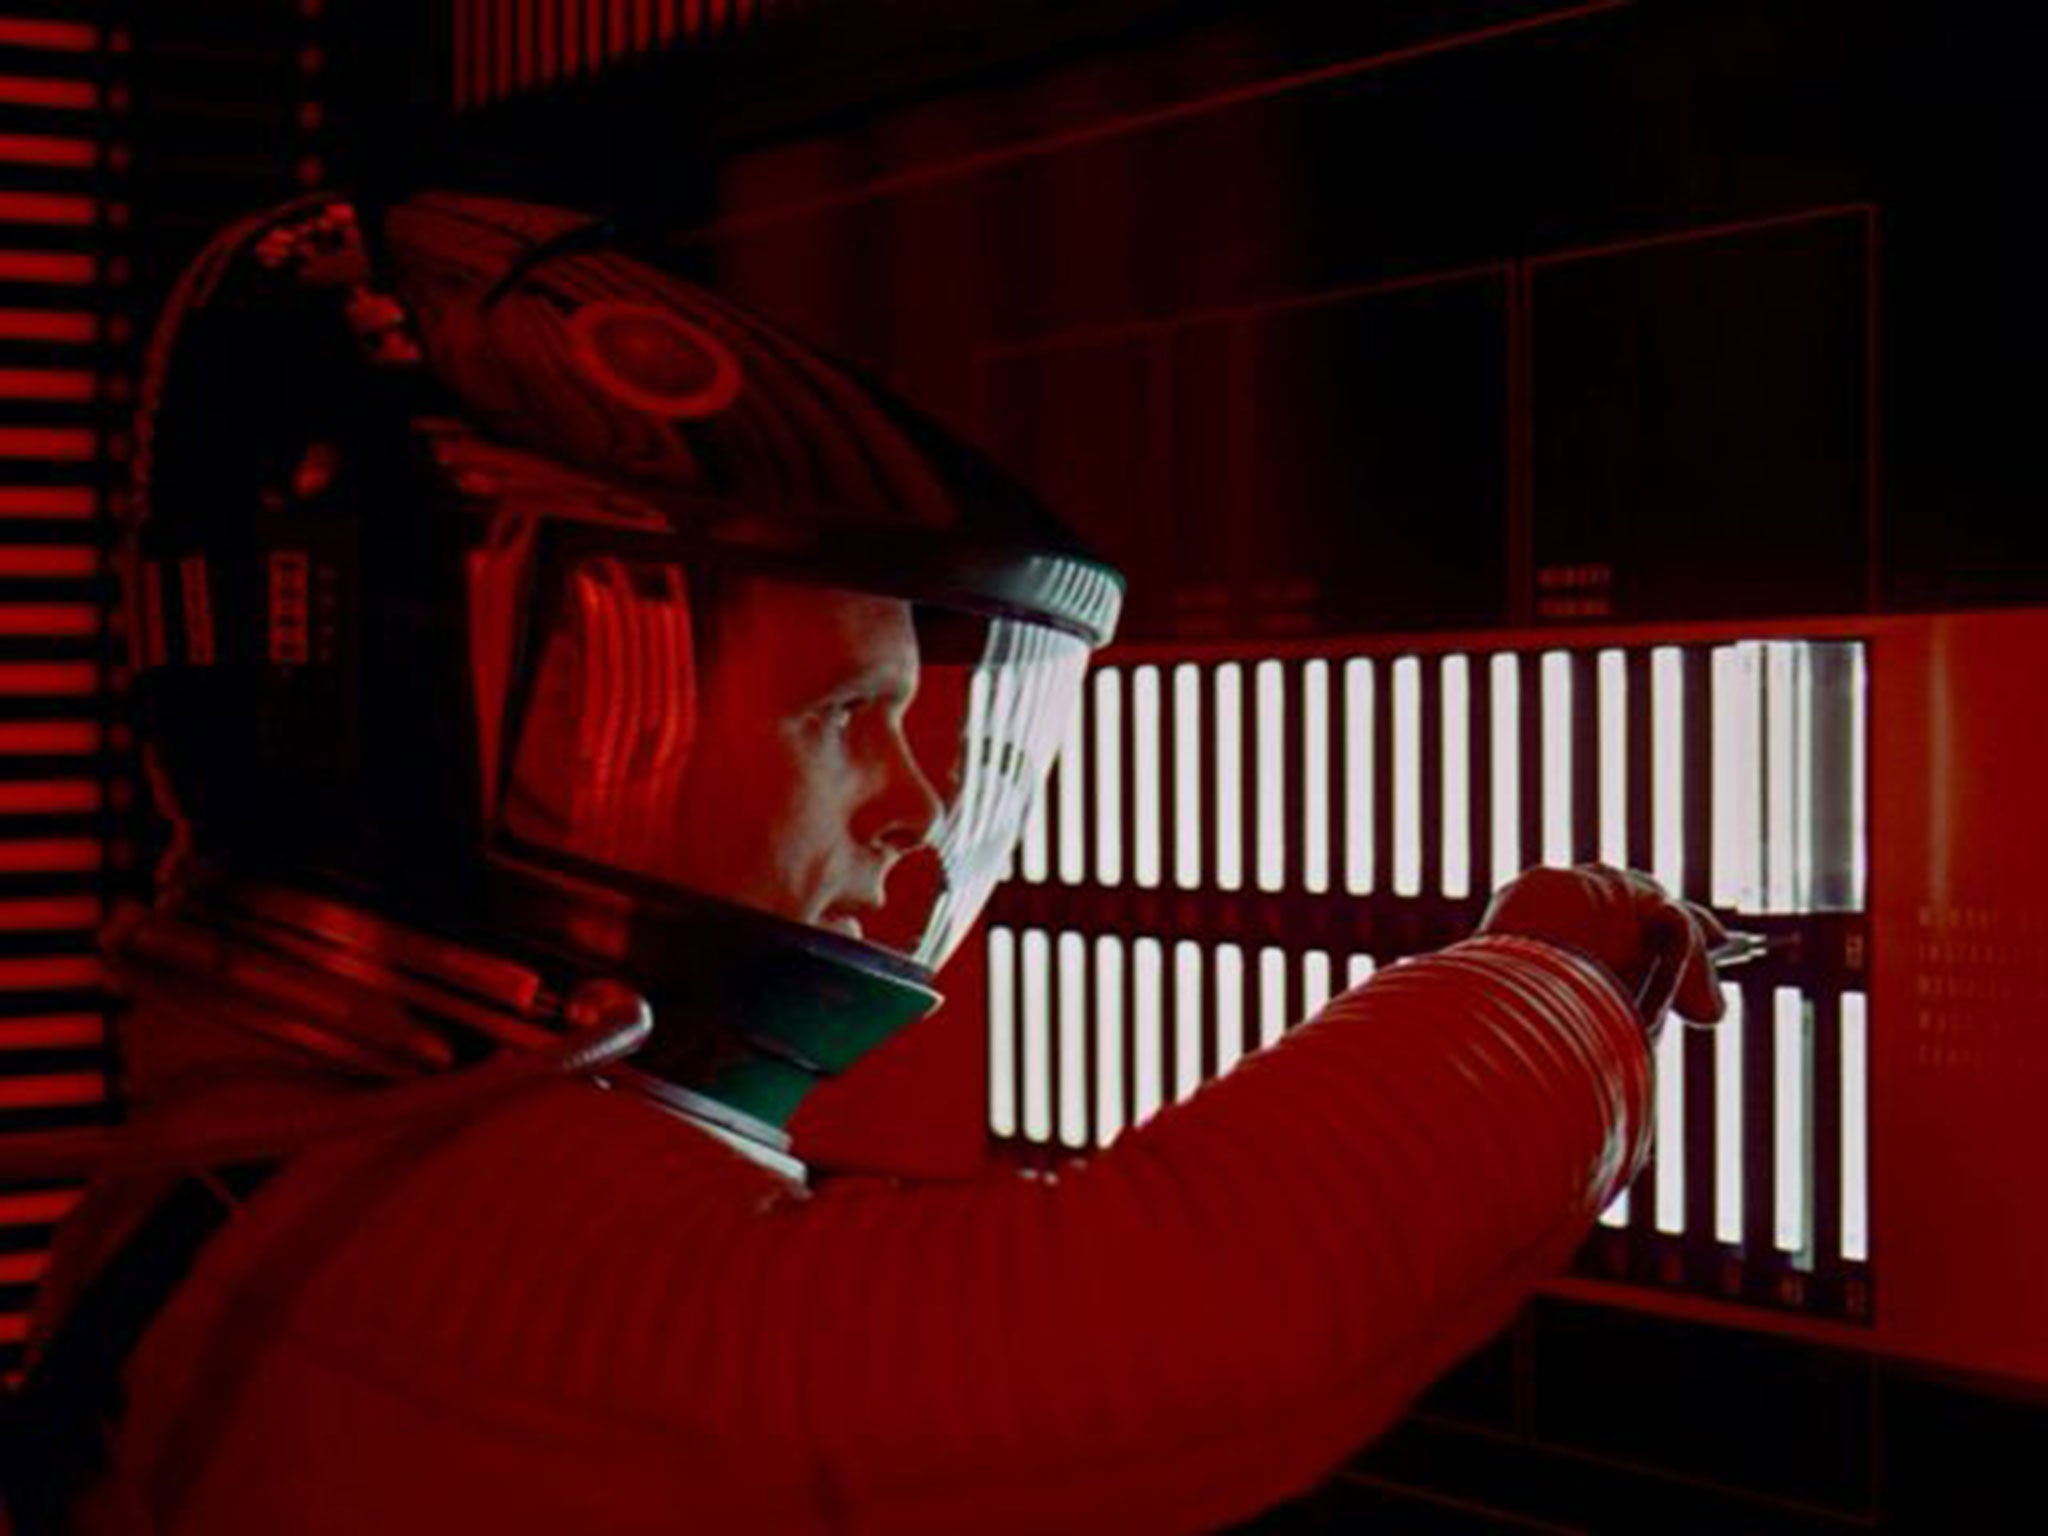 HAL, the out of control computer in 2001: A Space Odyssey